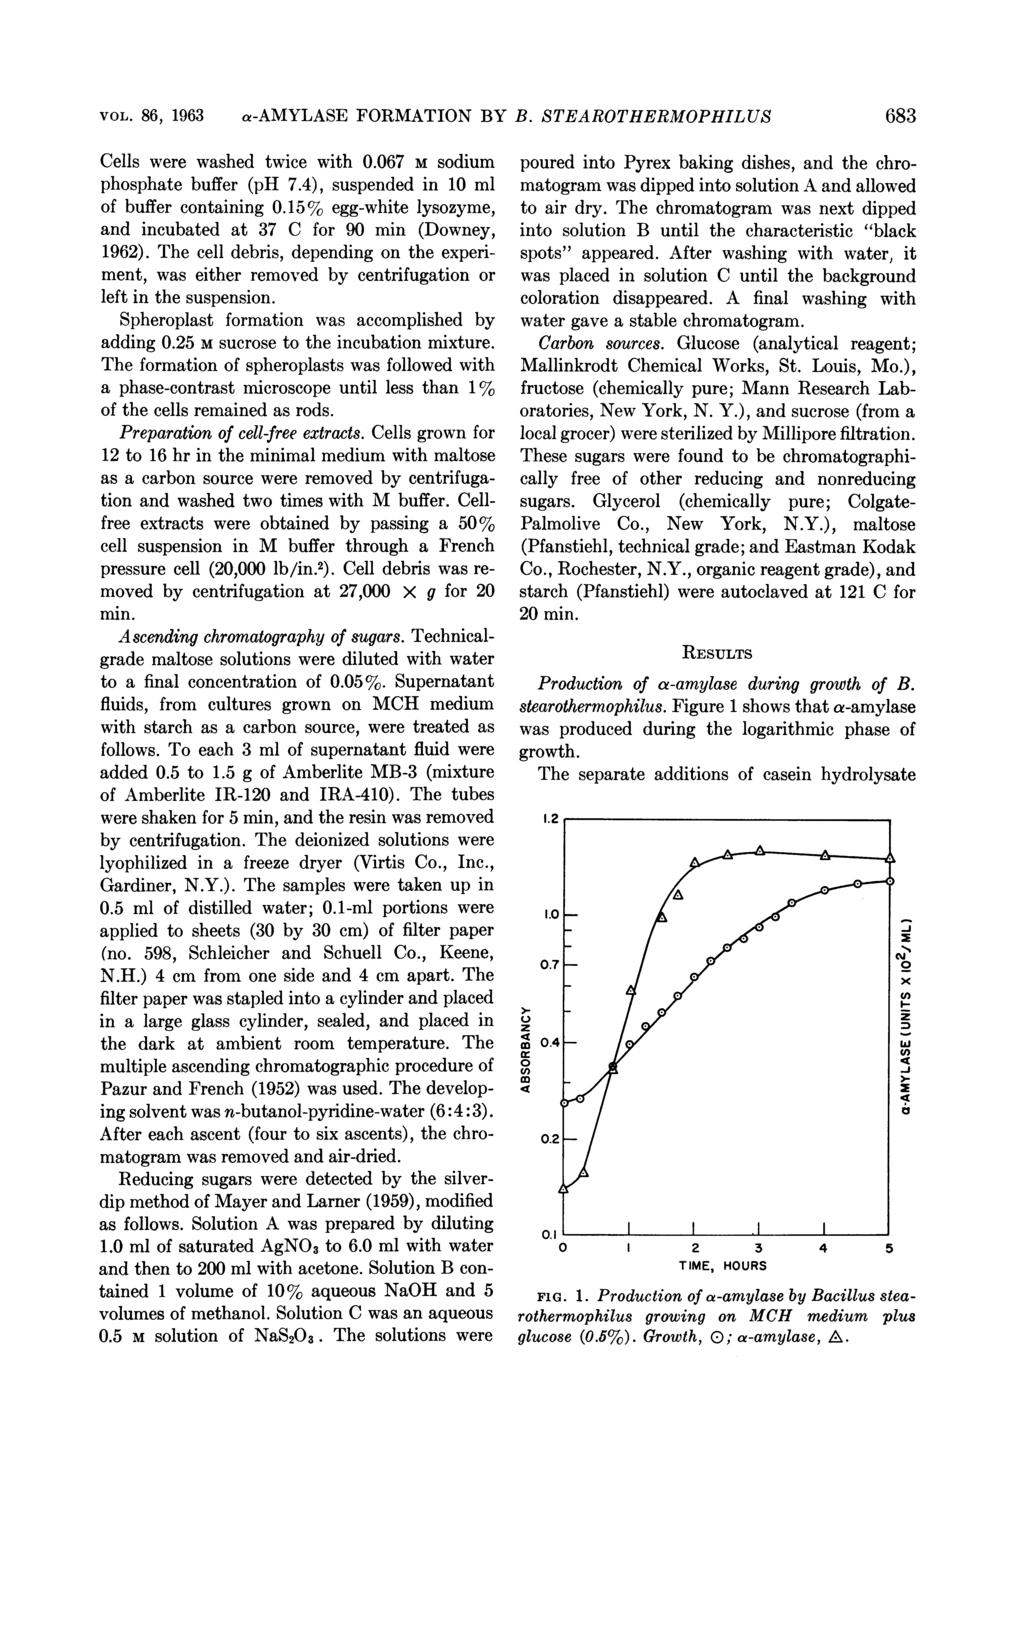 VOL. 86, 1963 a-amylase FORMATION BY B. STEAROTHERMOPHILUS68 683 Cells were washed twice with 0.067 m sodium phosphate buffer (ph 7.4), suspended in 10 ml of buffer containing 0.